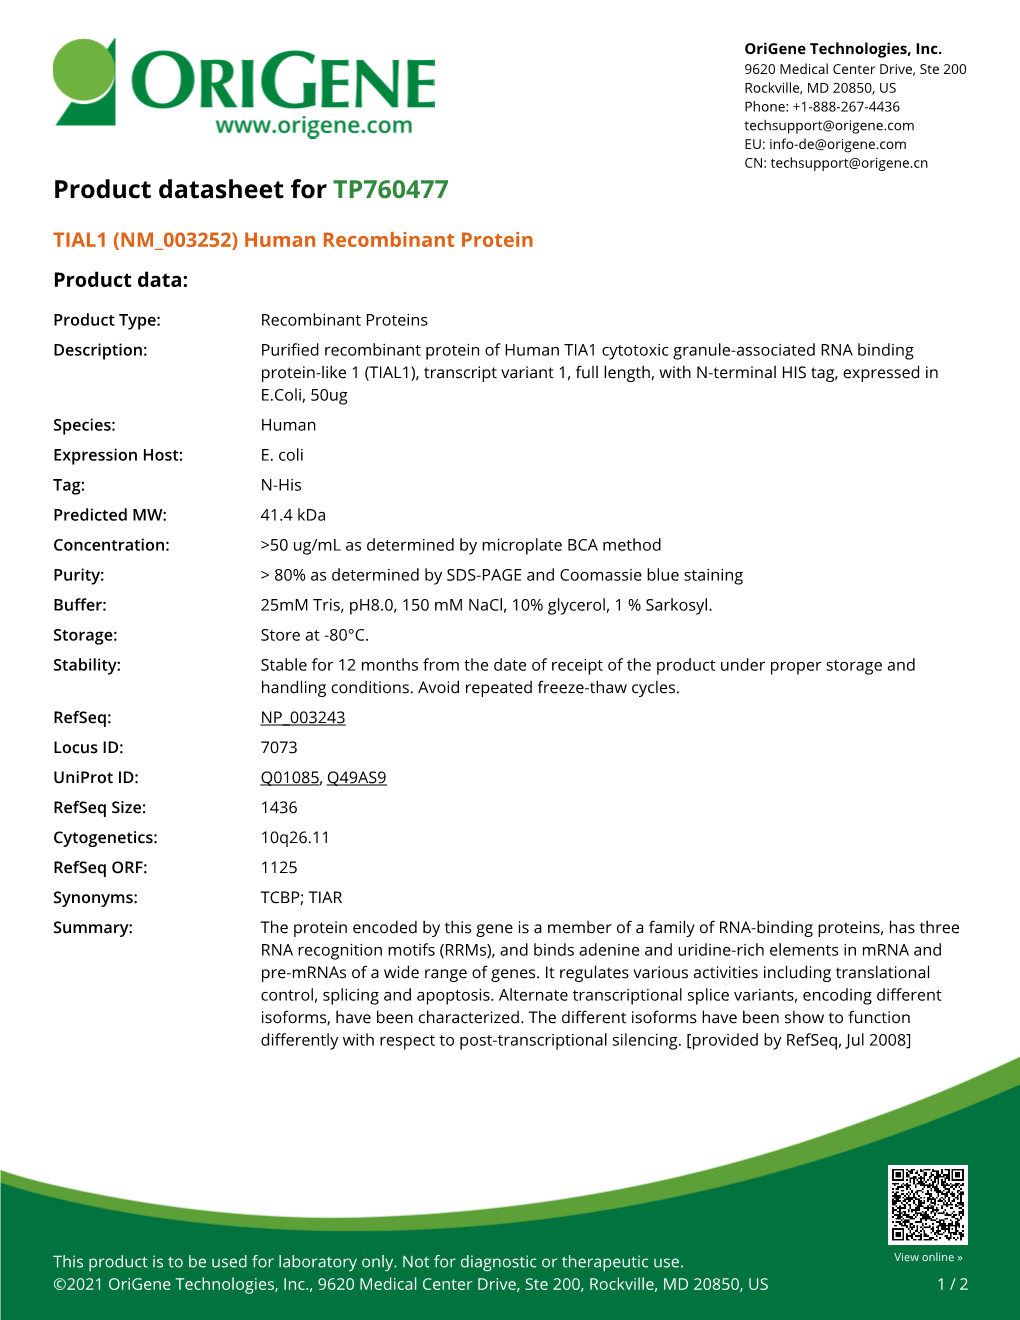 TIAL1 (NM 003252) Human Recombinant Protein Product Data